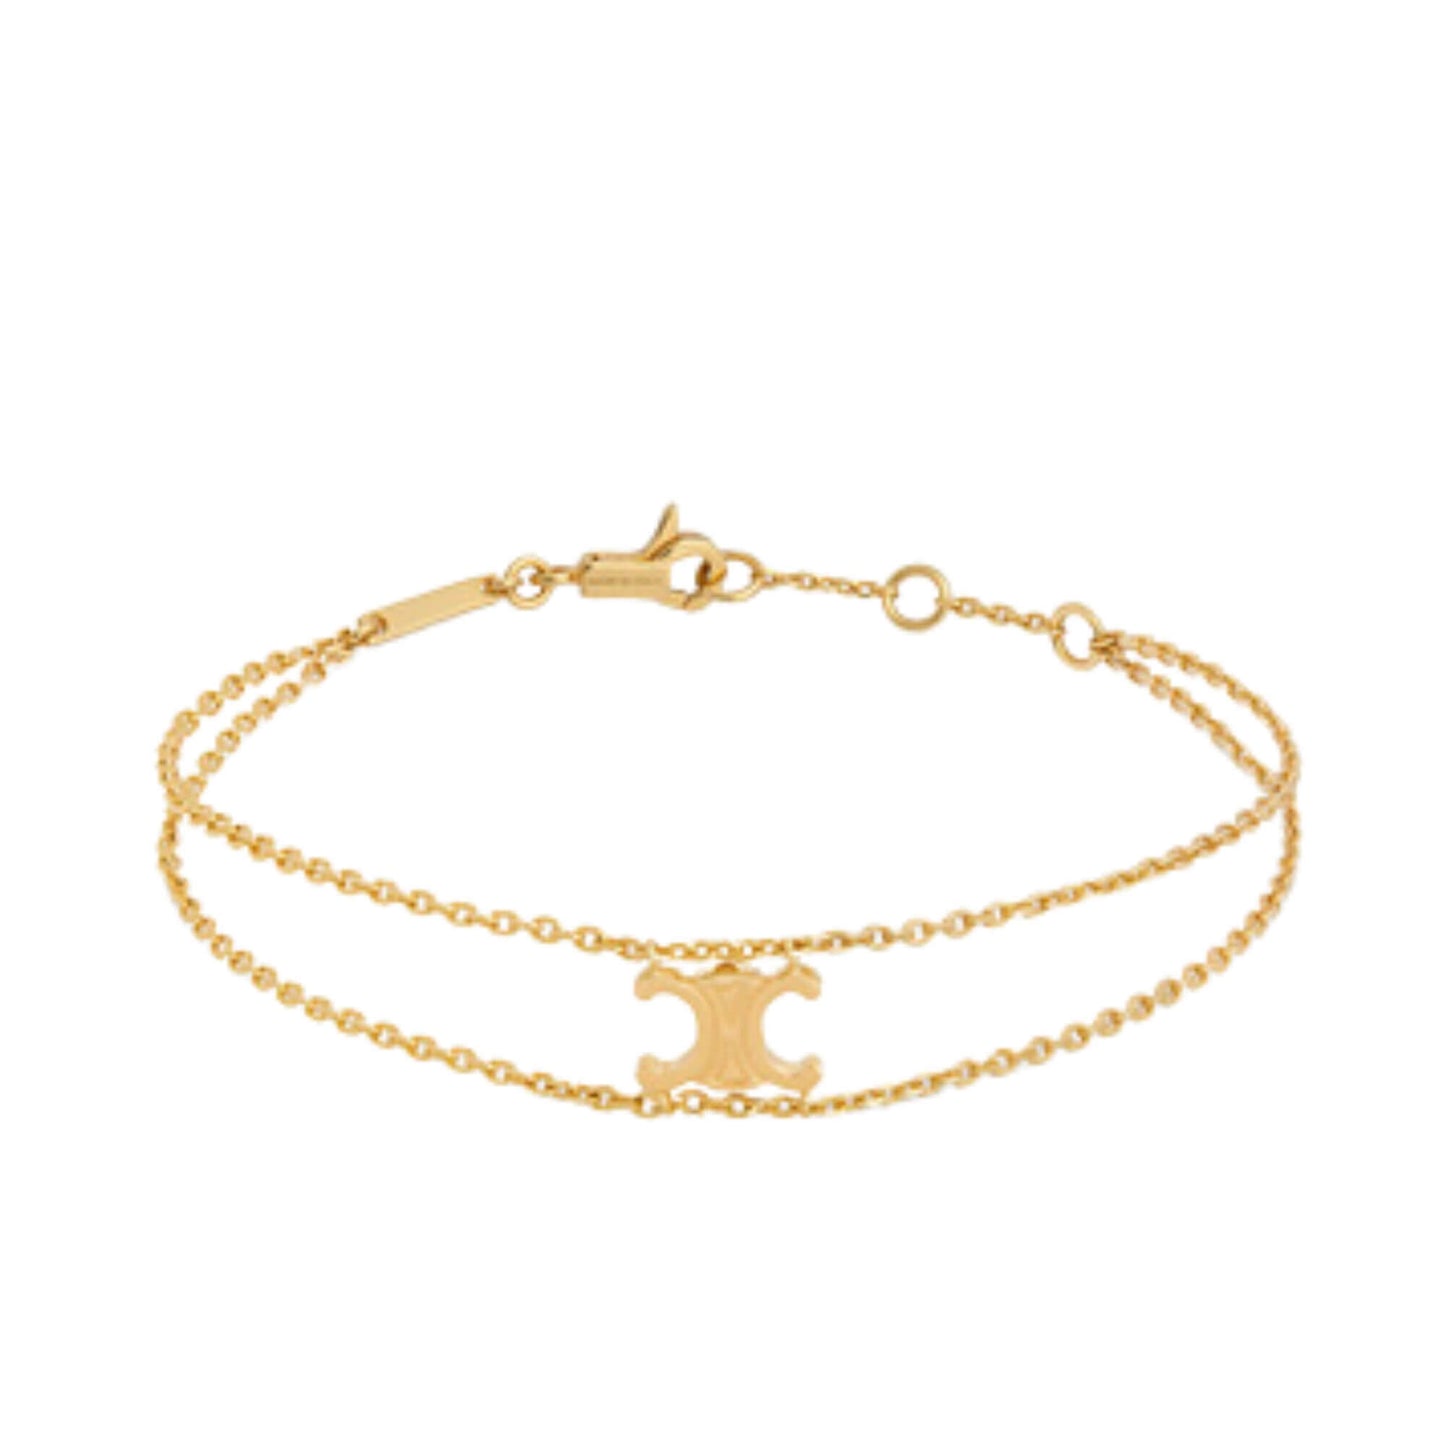 CELINE TRIOMPHE SUSPENDED BRACELET IN BRASS WITH GOLD FINISH